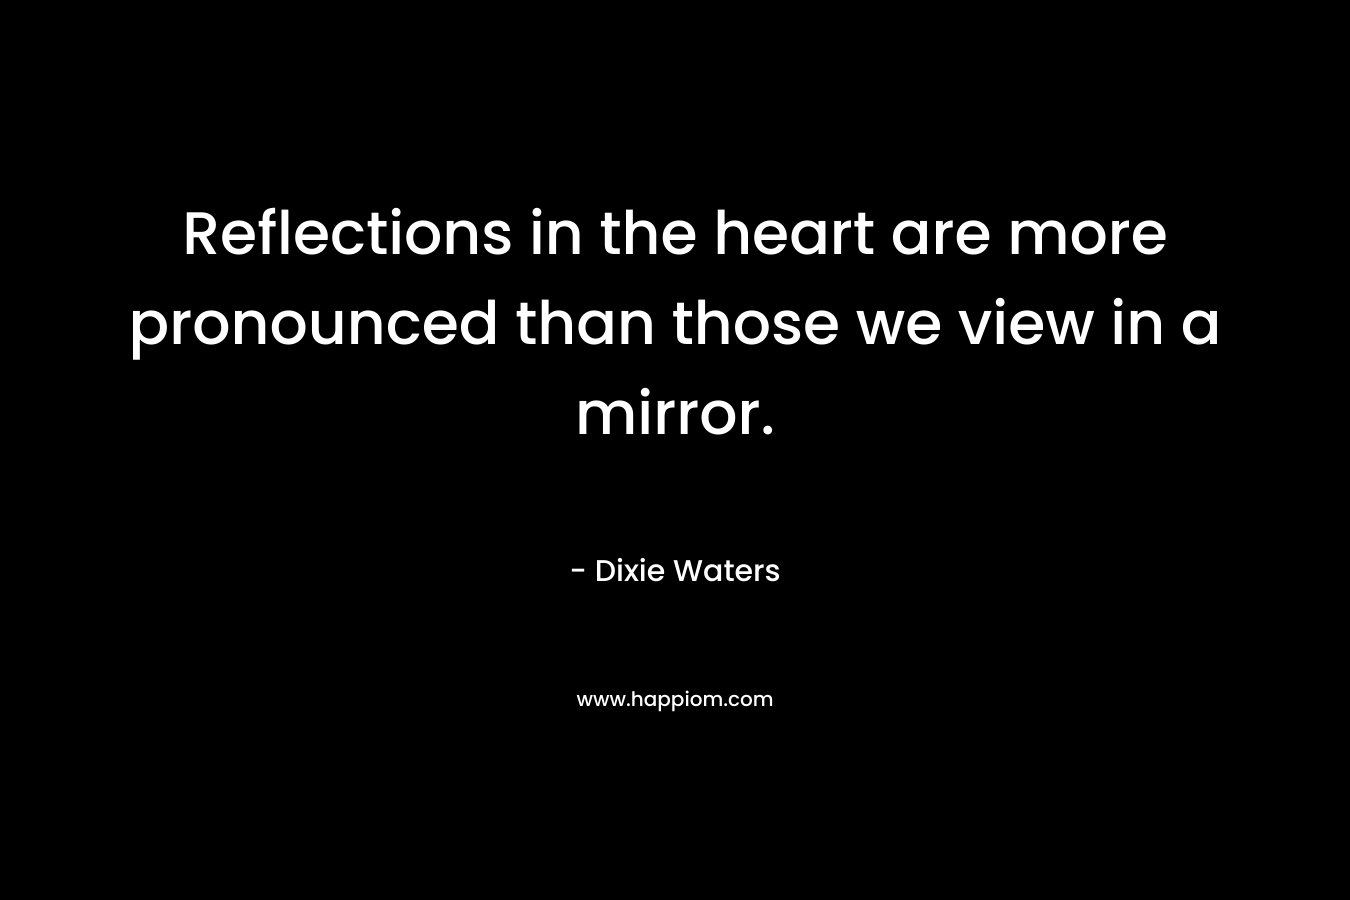 Reflections in the heart are more pronounced than those we view in a mirror. – Dixie Waters